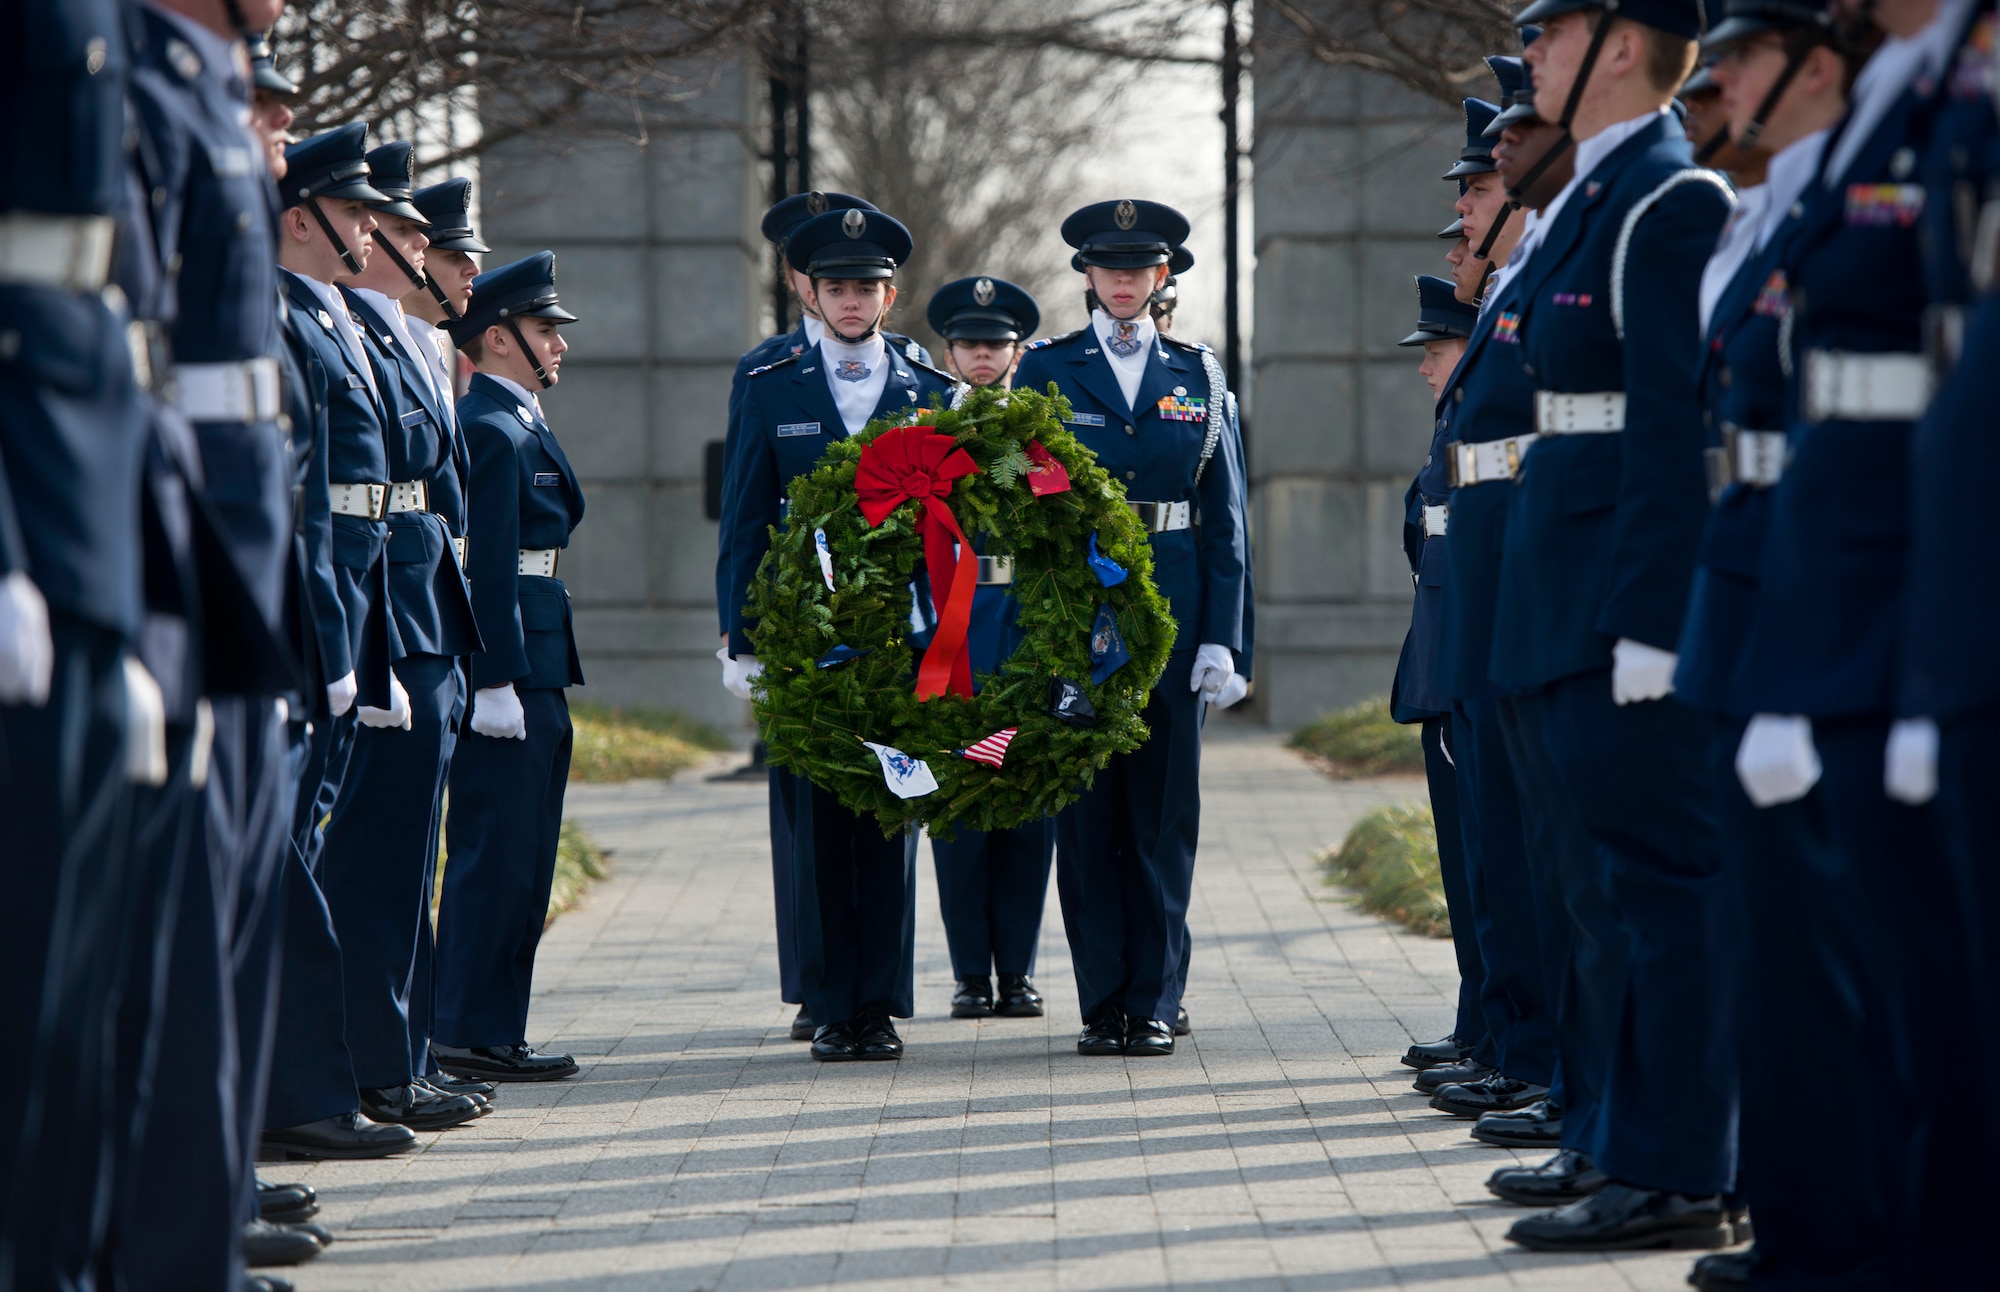 Civil Air Patrol cadets carry a wreath to be placed at a grave marker Dec. 13, 2014, during Wreaths Across America at Arlington National Cemetery in Arlington, Va. Nearly 50,000 volunteers came together to place remembrance wreaths on the headstones of about 230,000 veterans during the event. (U.S. Air Force photo/Staff Sgt. Vernon Young Jr.)